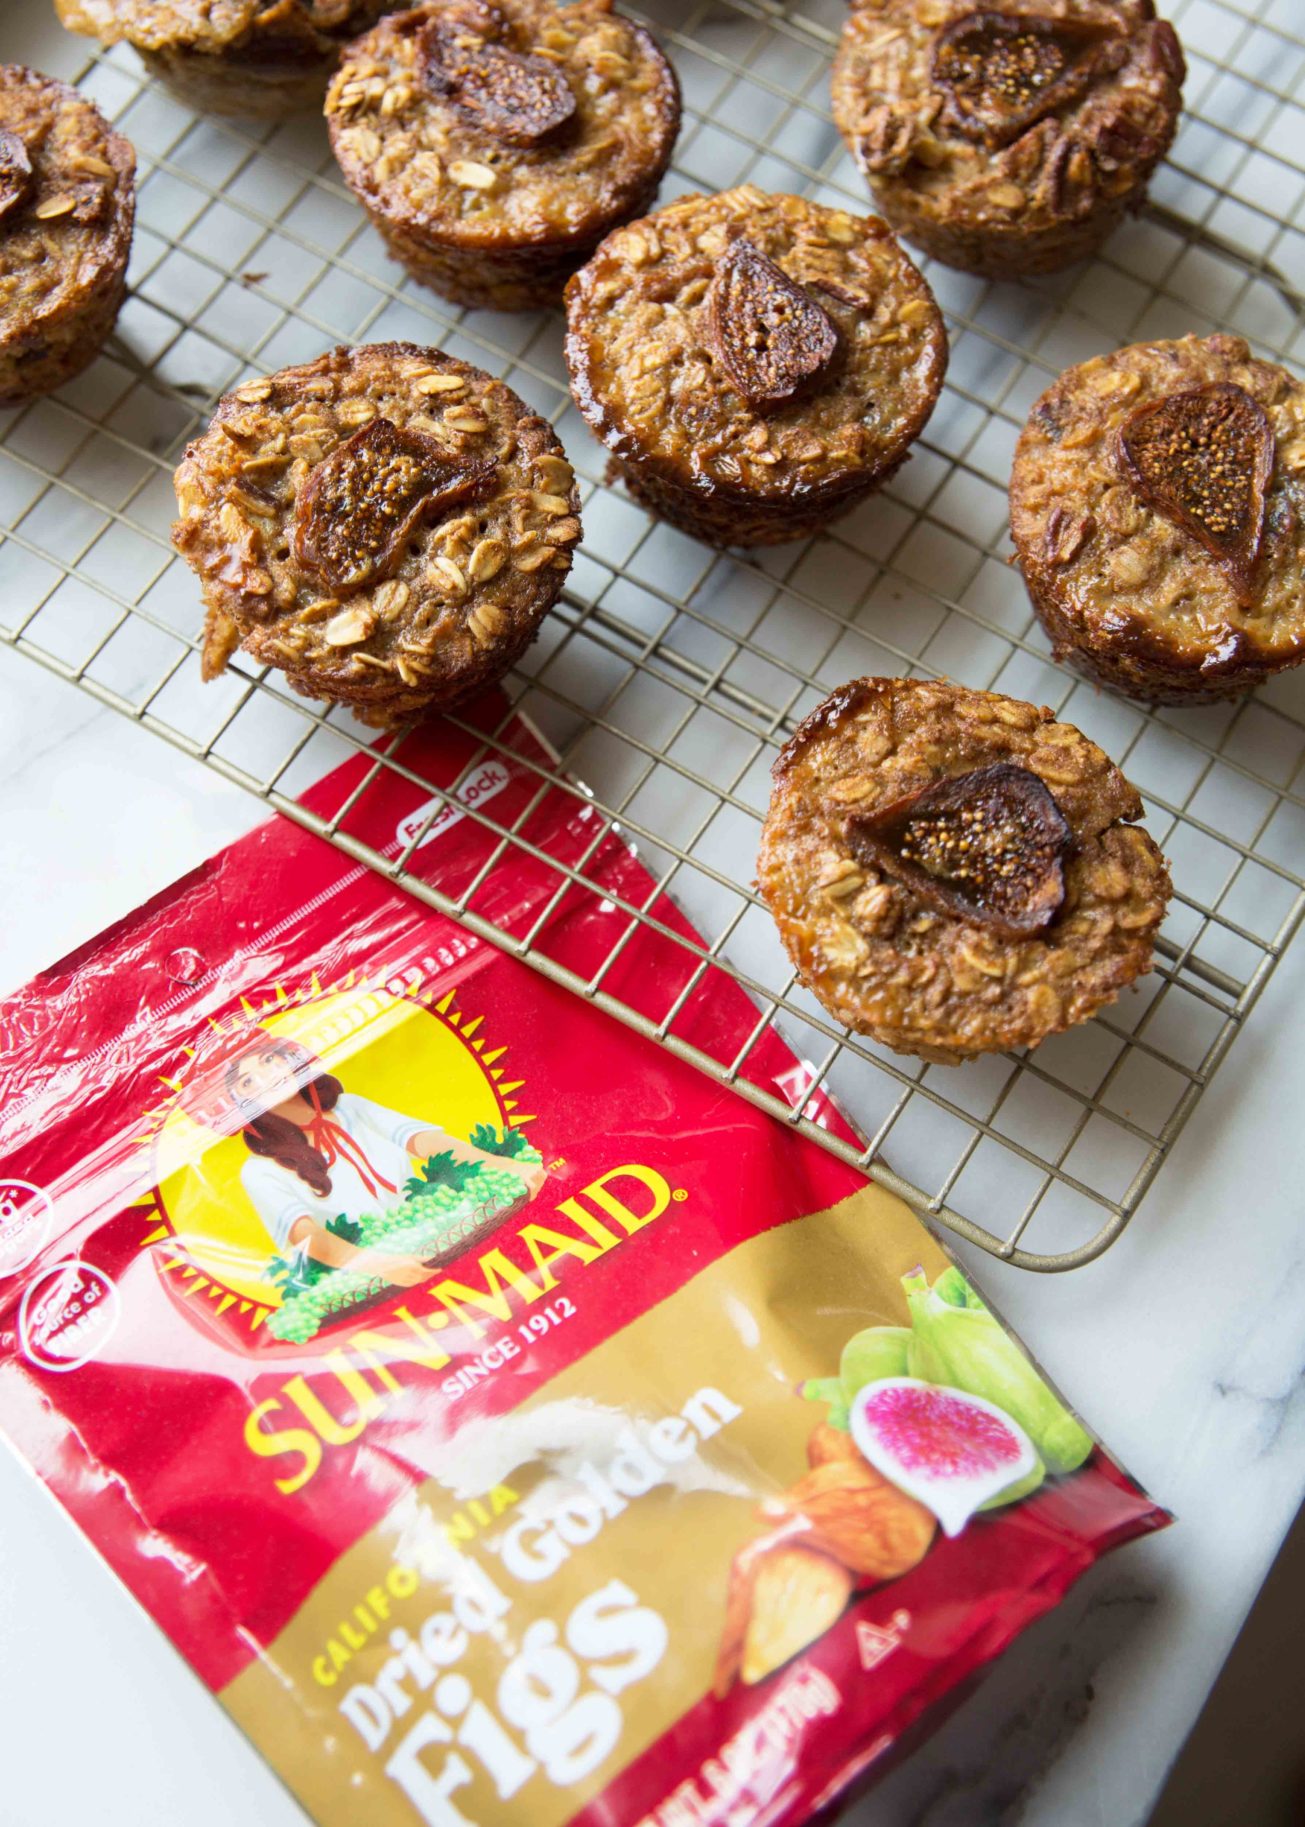 Chai spiced pre-portioned baked oatmeal on a wire rack with a bag of Sun-Maid Golden Figs